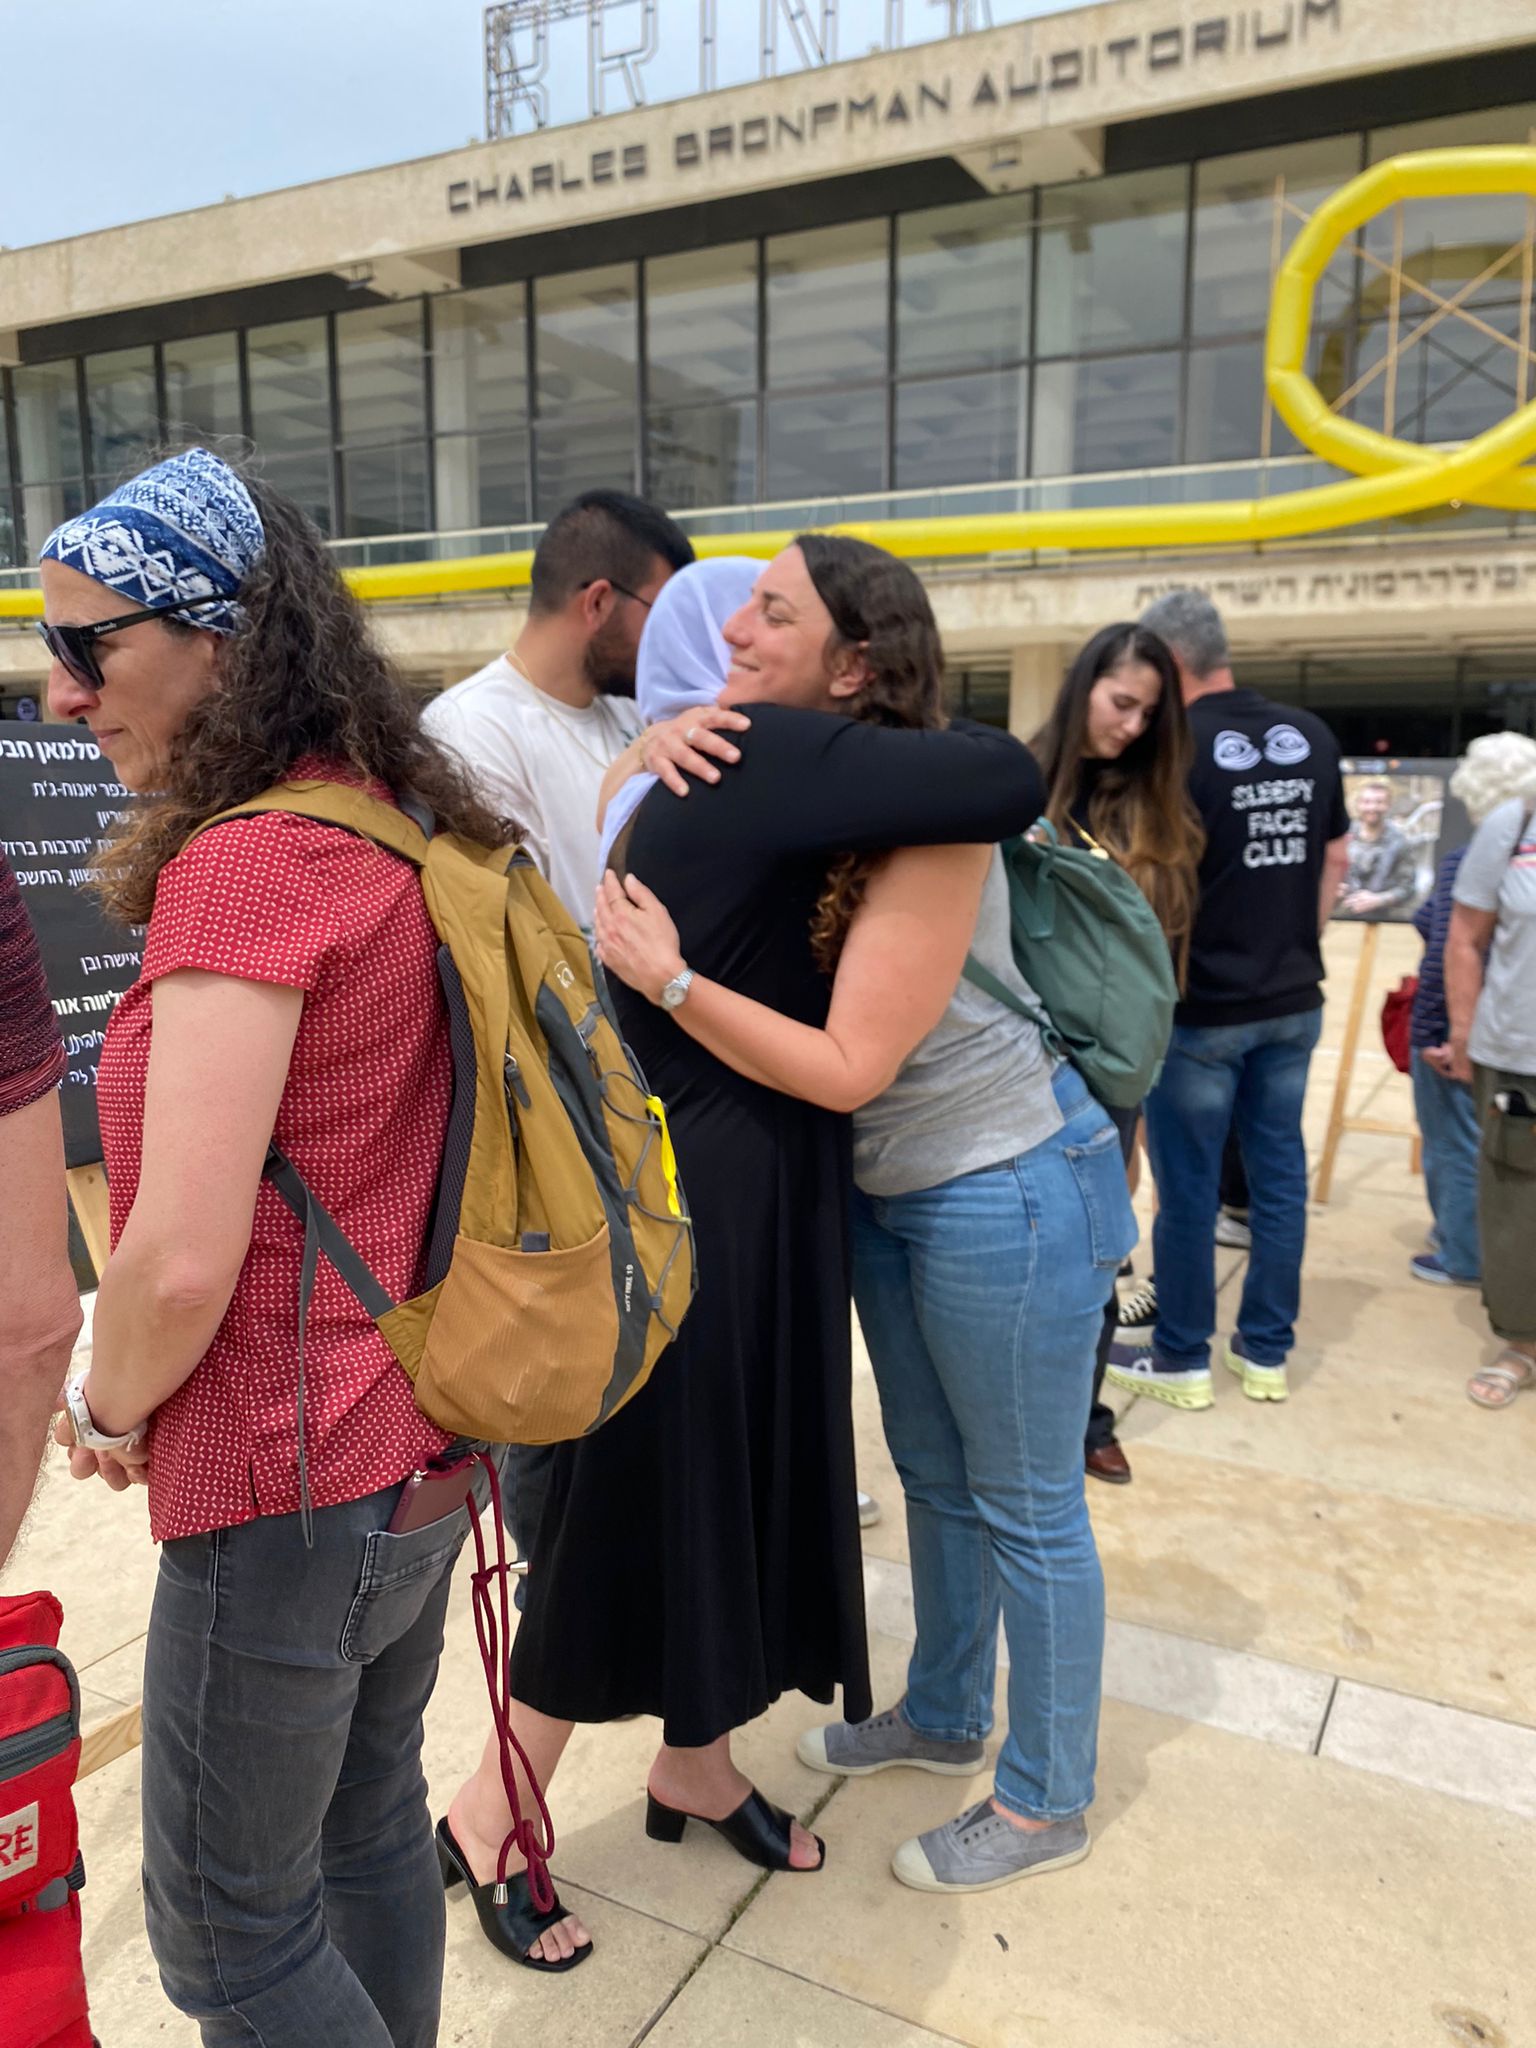 Two attendees embrace at the exhibition (Photo: Yahel Farag)